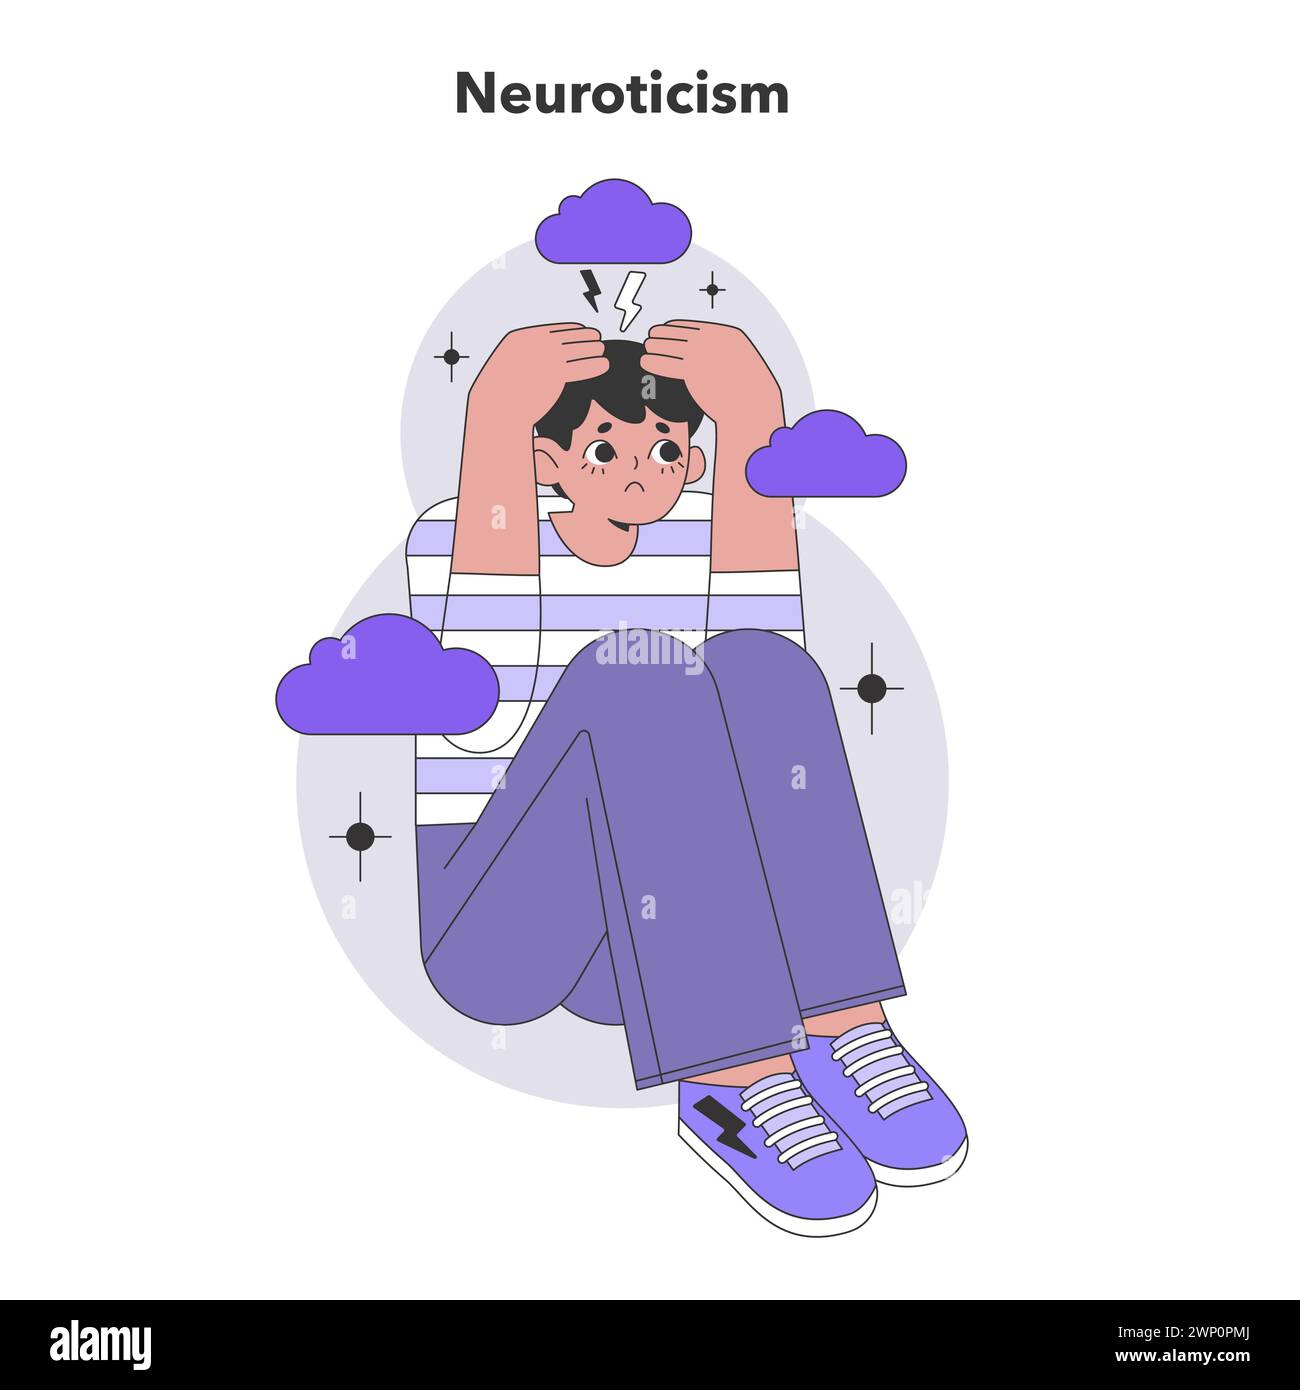 Neuroticism dimension of Big Five Personality Traits. An individual experiencing stress and emotional instability, depicted in a thought-provoking scene. Flat vector illustration. Stock Vector